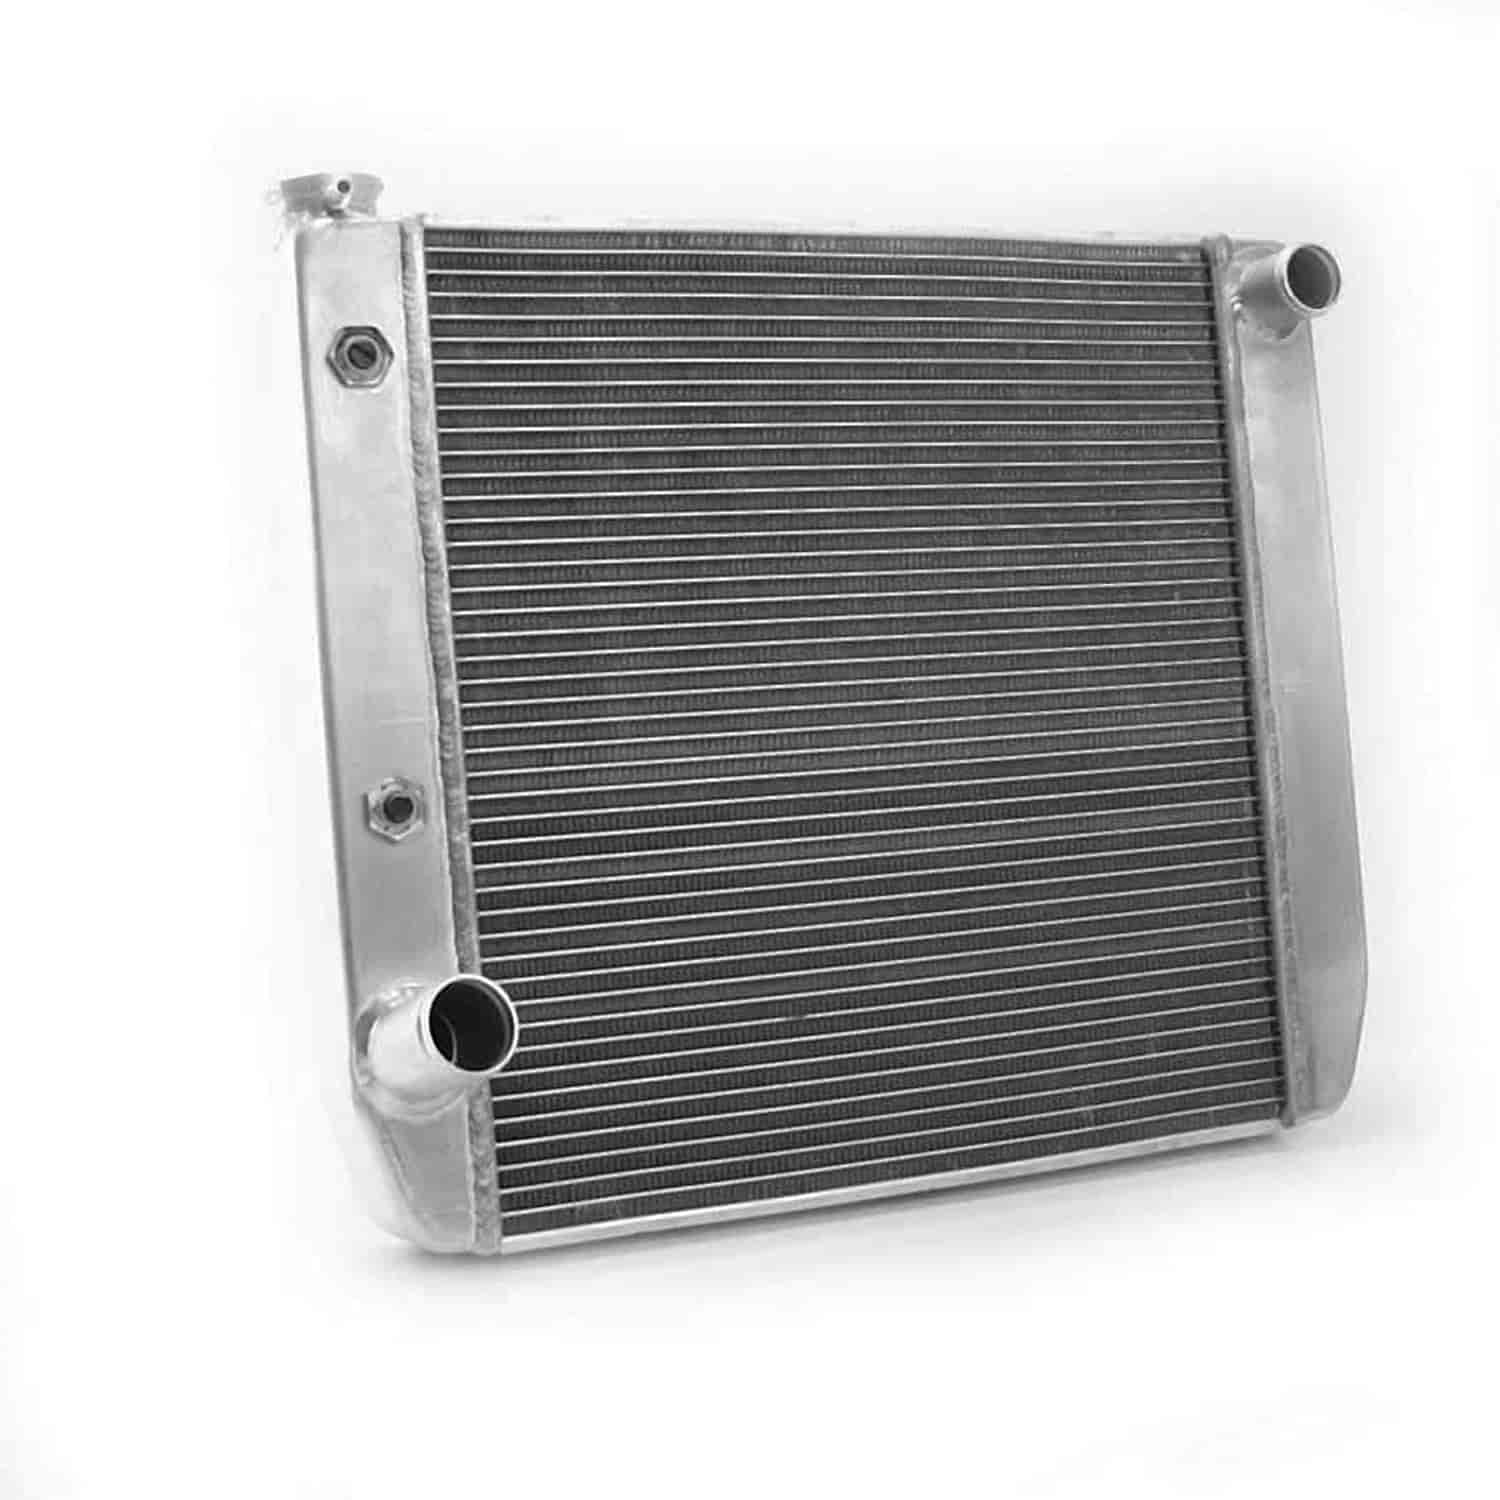 ClassicCool Universal Fit Radiator Single Pass Crossflow Design 22" x 19" with Transmission Cooler